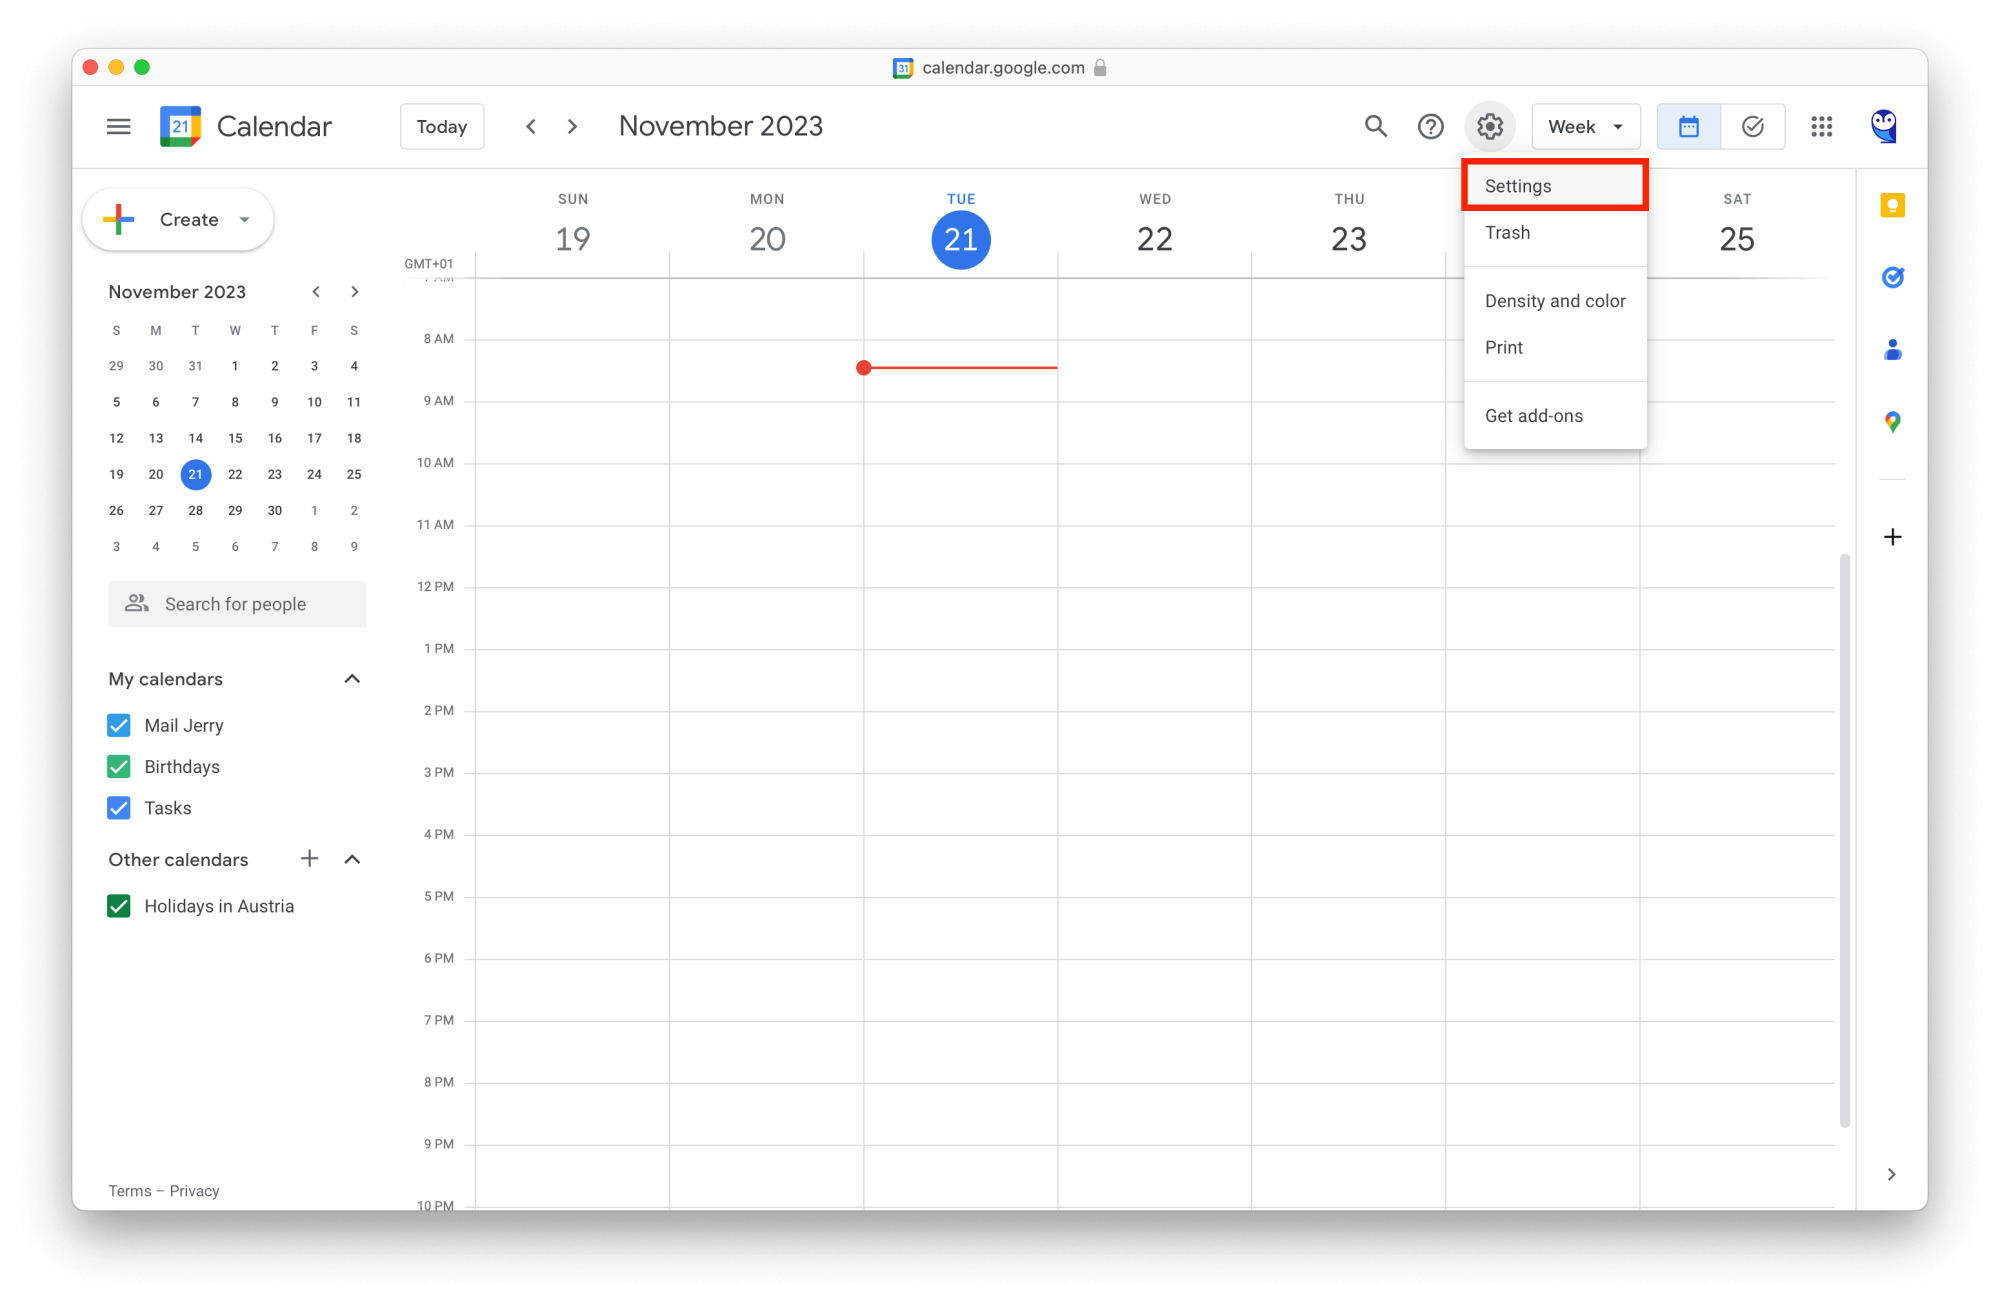 Migrate G Suite to Office 365: Export calendar – Step 01